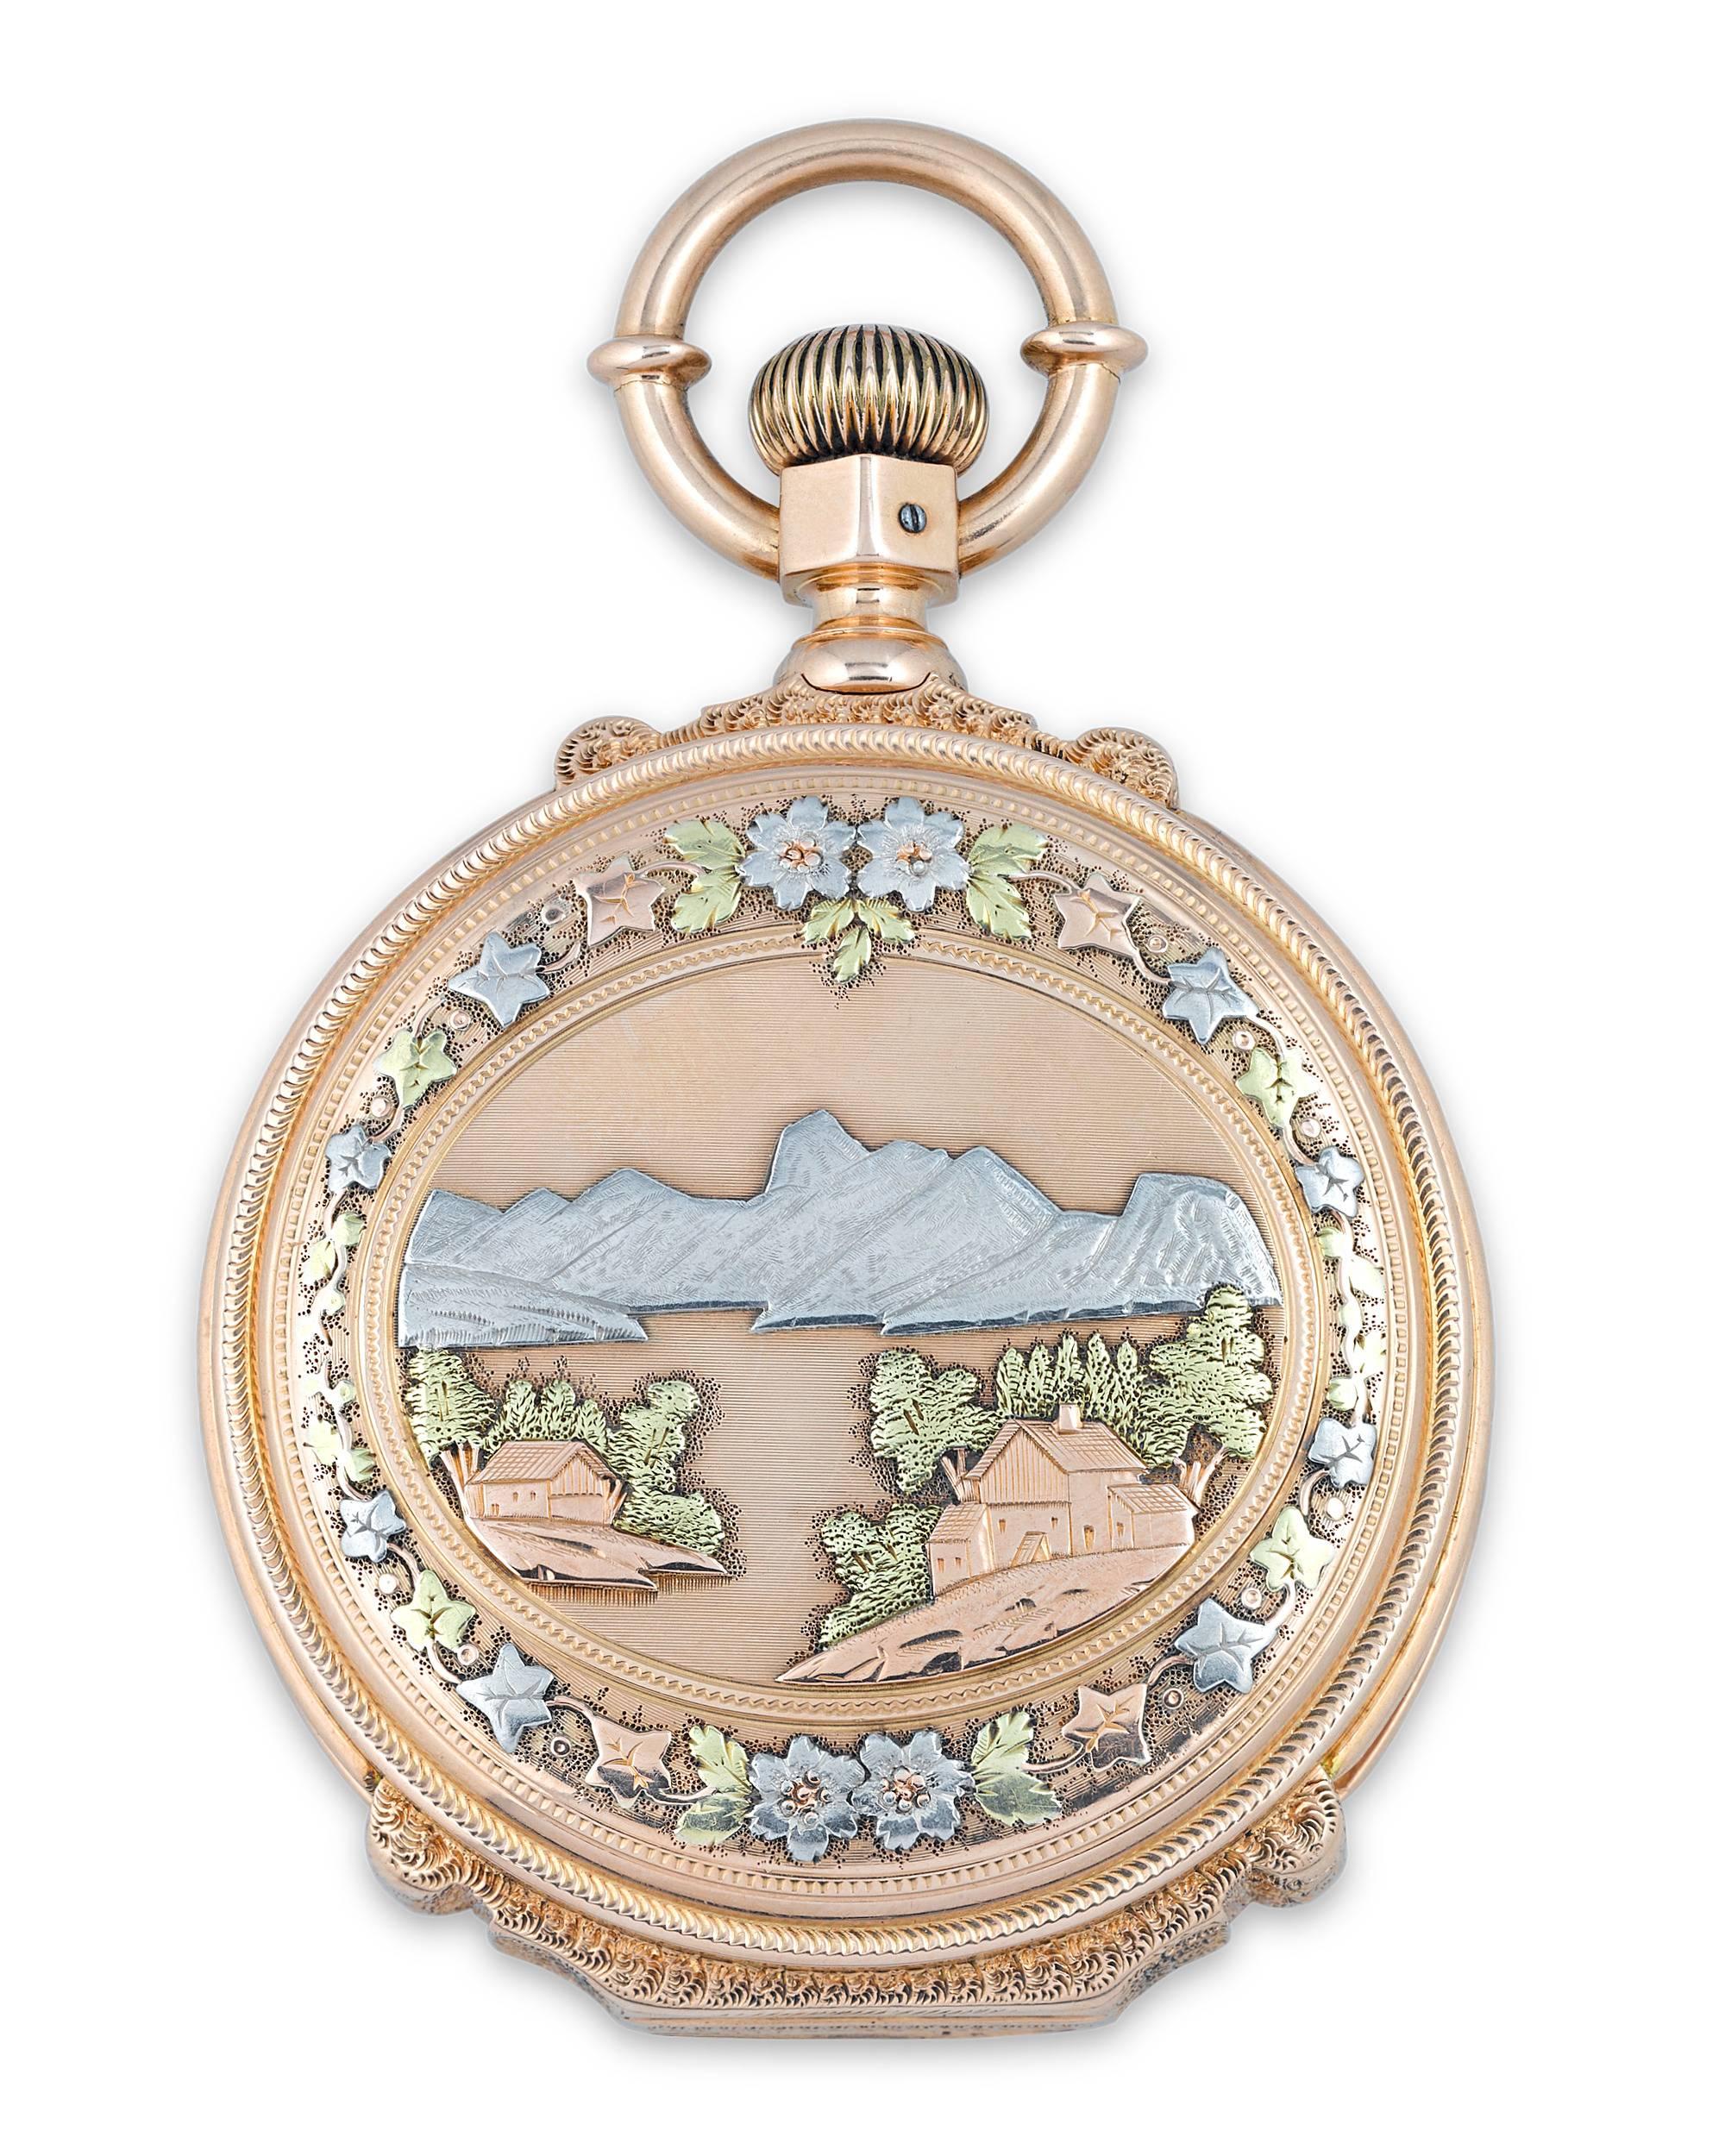 Housed in a majestic case of 14K yellow, rose, white and green gold, this pocket watch crafted by the American Watch Co. is as exquisite as it is functional. Masterfully engraved and chased, the case features an awe-inspiring mountain landscape with